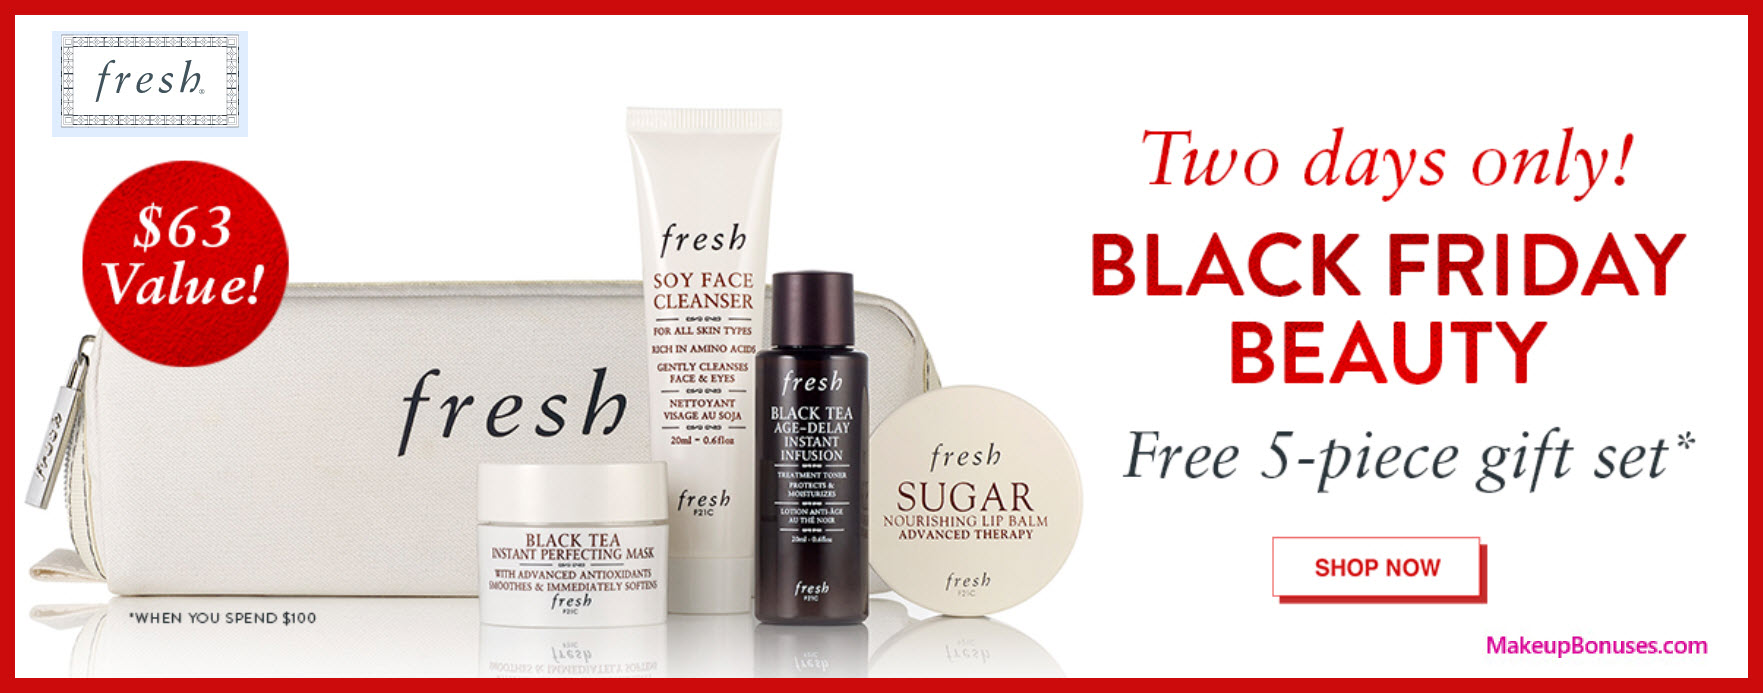 Receive a free 5-pc gift with your $100 Fresh purchase